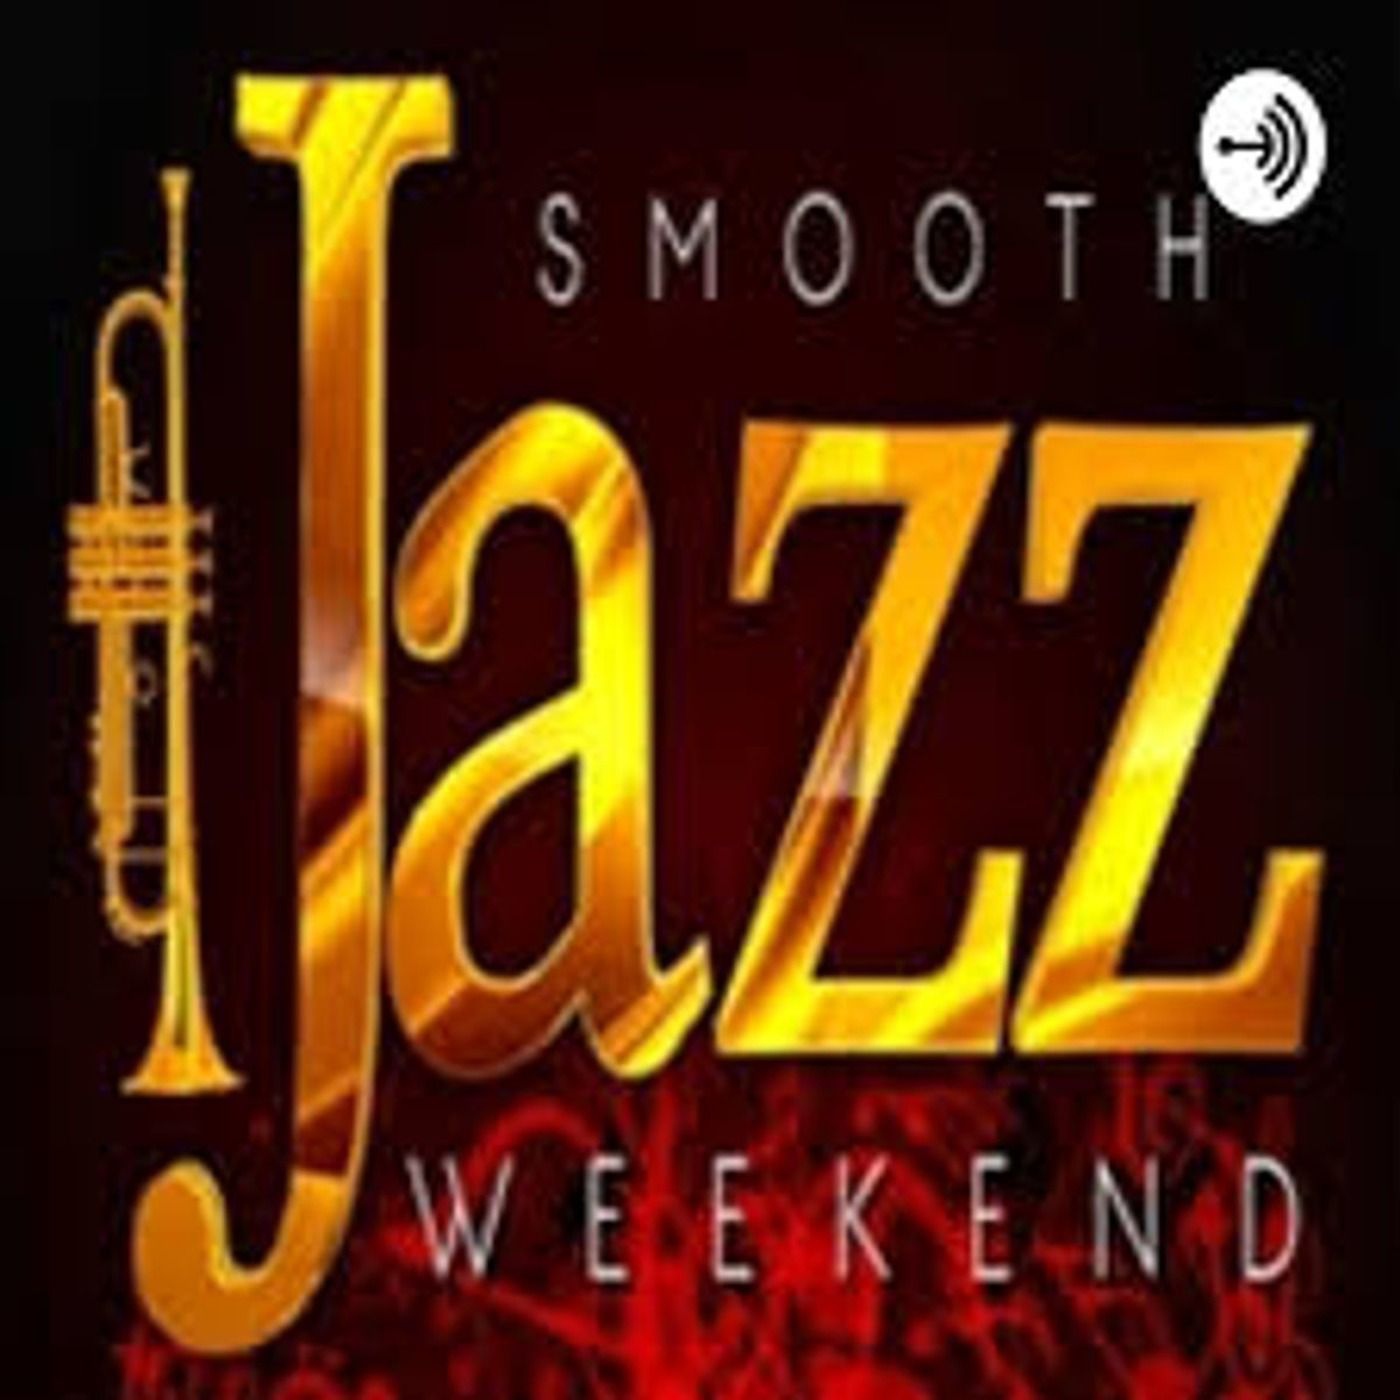 A highlight from  Smooth Jazz Weekend with Tina E. (My Heart Is Yours)